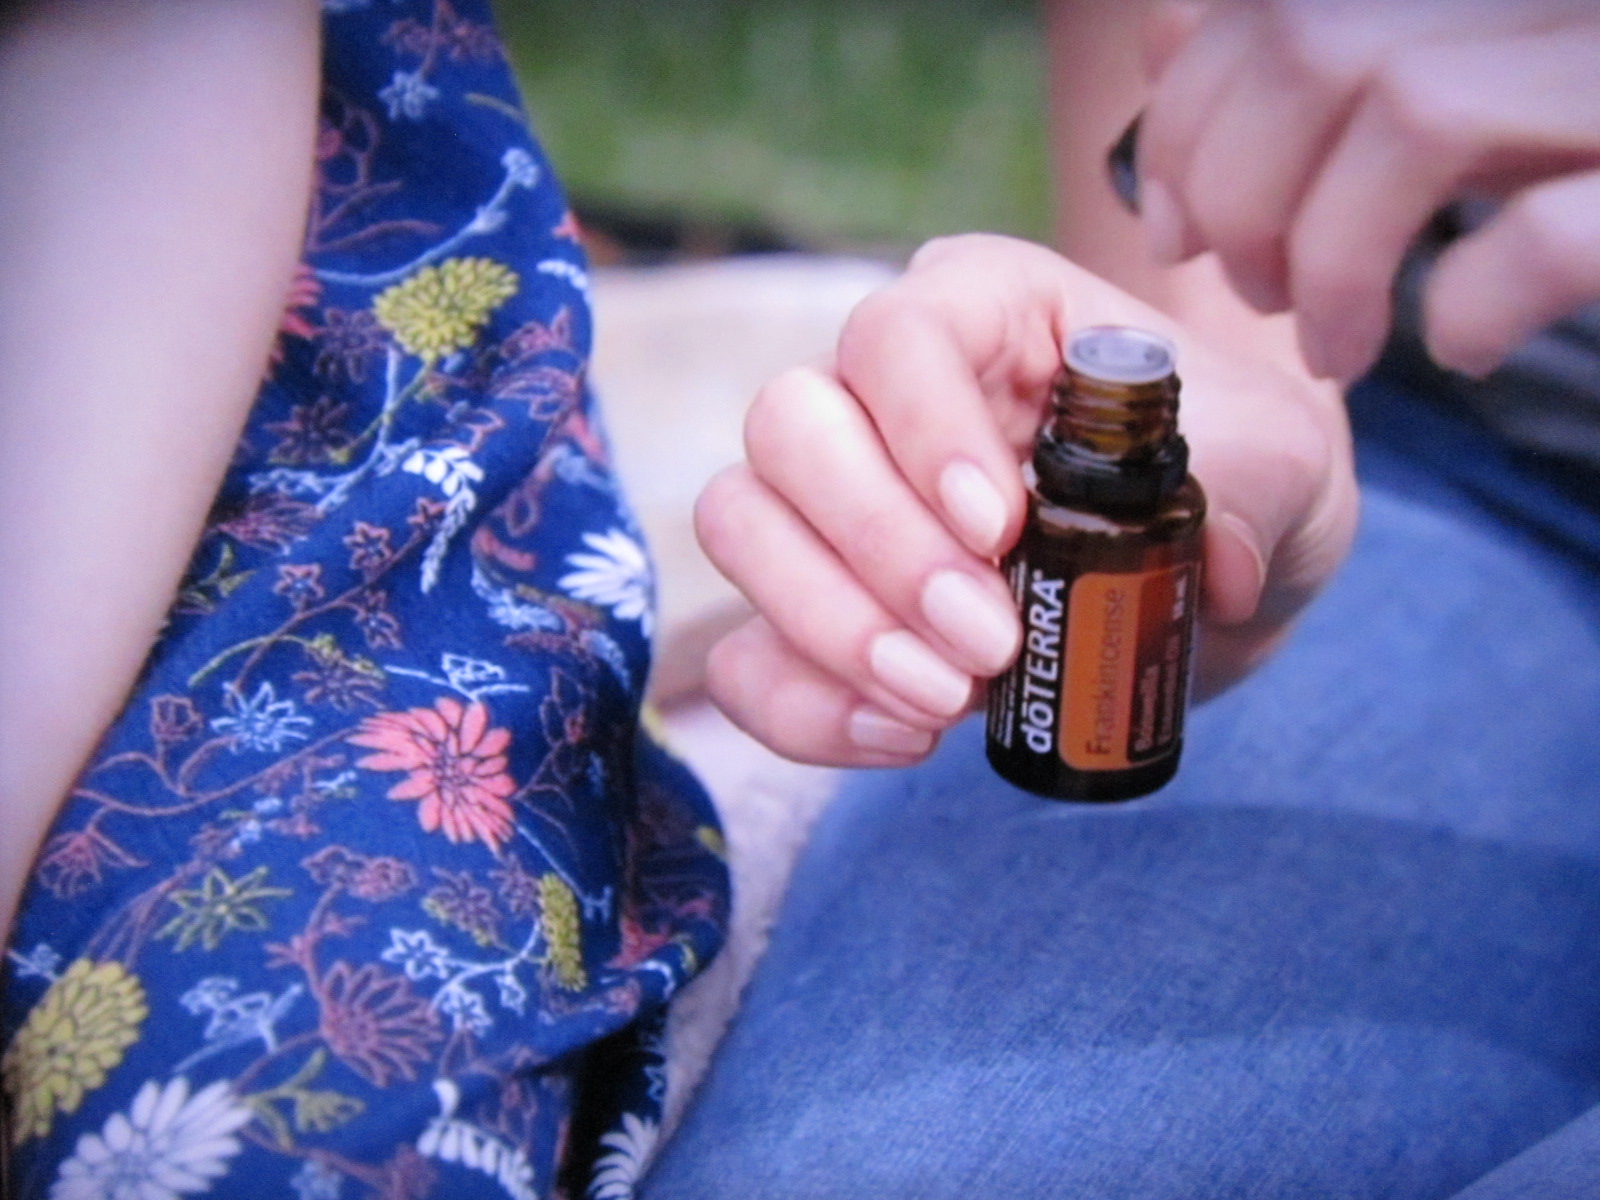 doTERRA Essential Oil of Frankincense